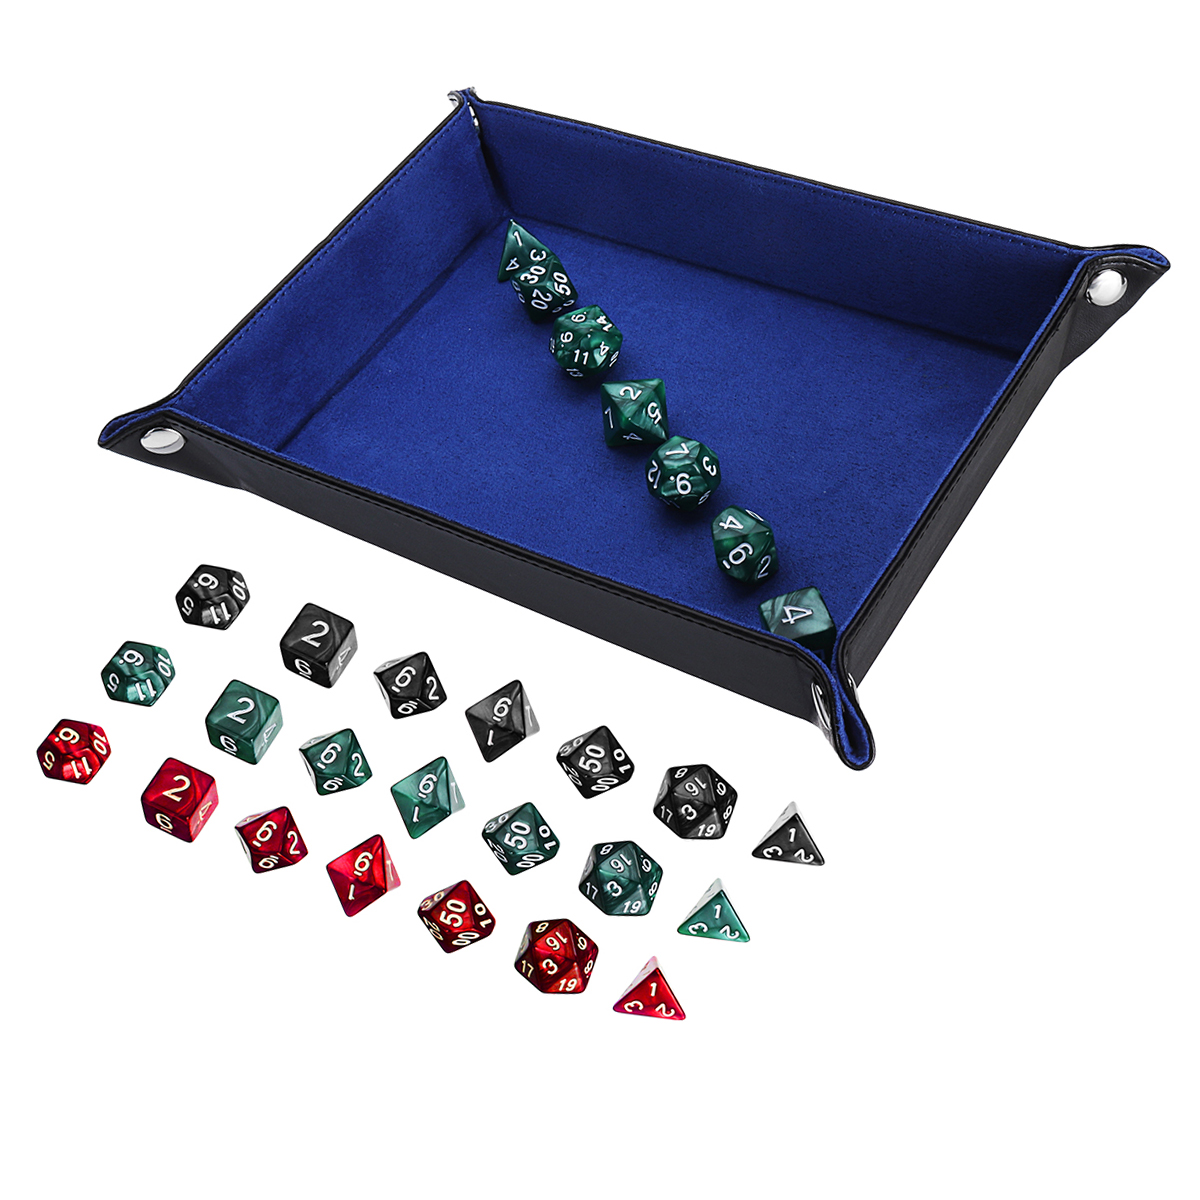 Portable-Fold-Dice-Tray-PU-Leather-with-7-Polyhedral-Dice-for-Tabletop-Dice-Games-1346582-2